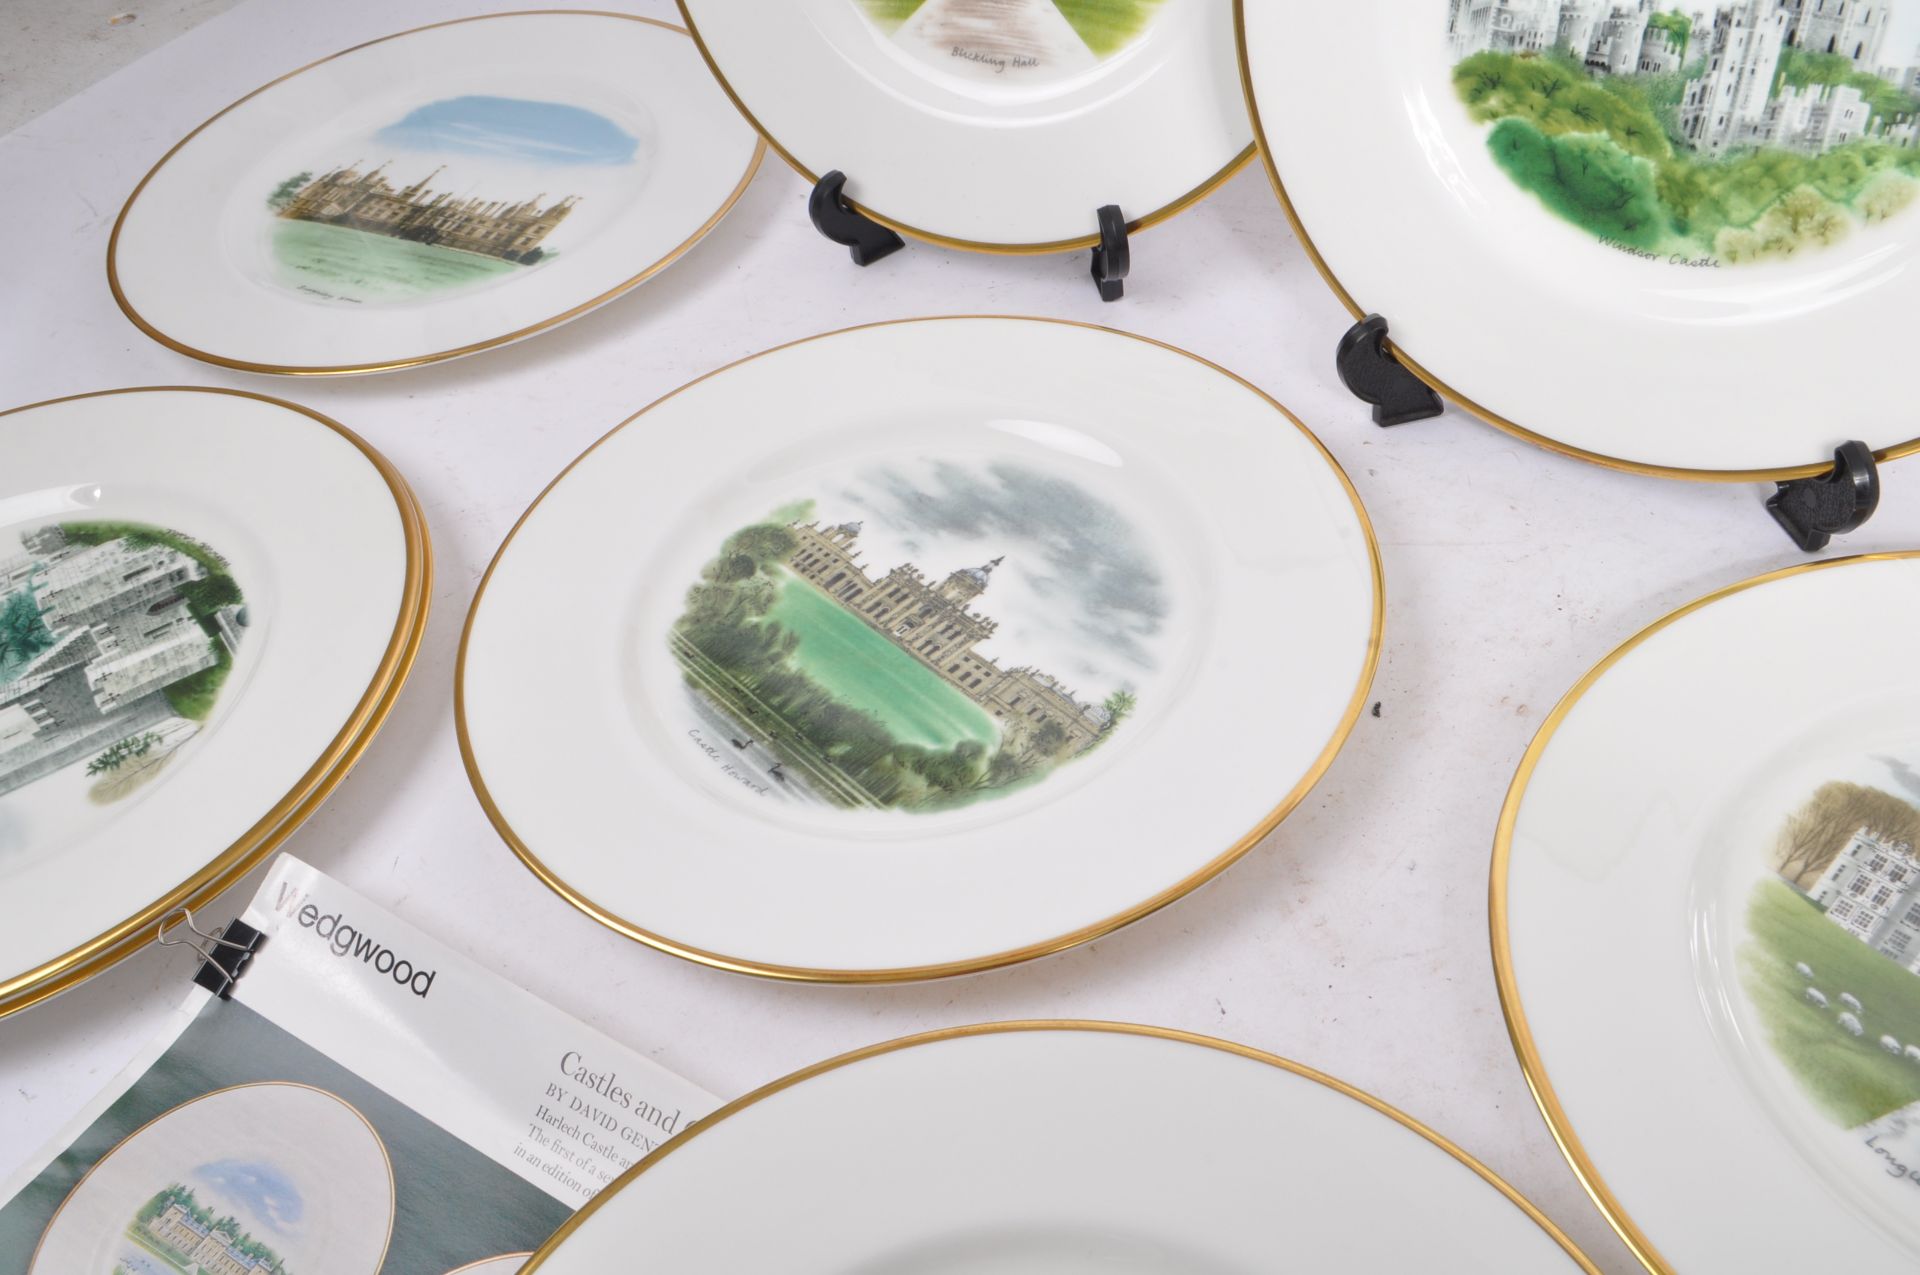 WEDGWOOD - CASTLE & COUNTRY HOUSE PORCELAIN PLATES - Image 6 of 11